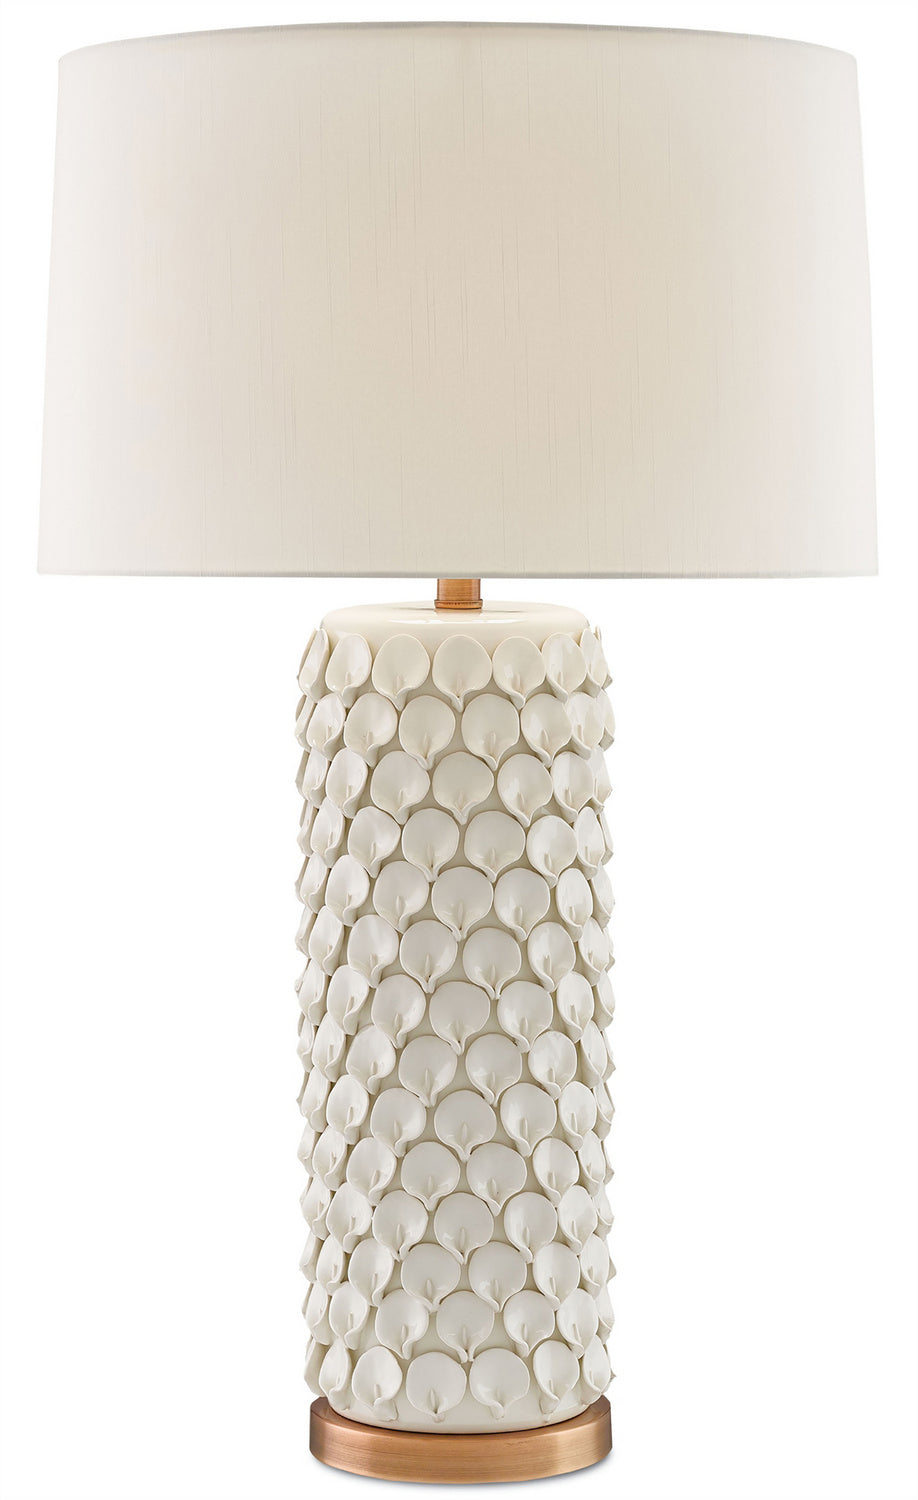 One Light Table Lamp from the Calla collection in Cream/Antique Brass finish